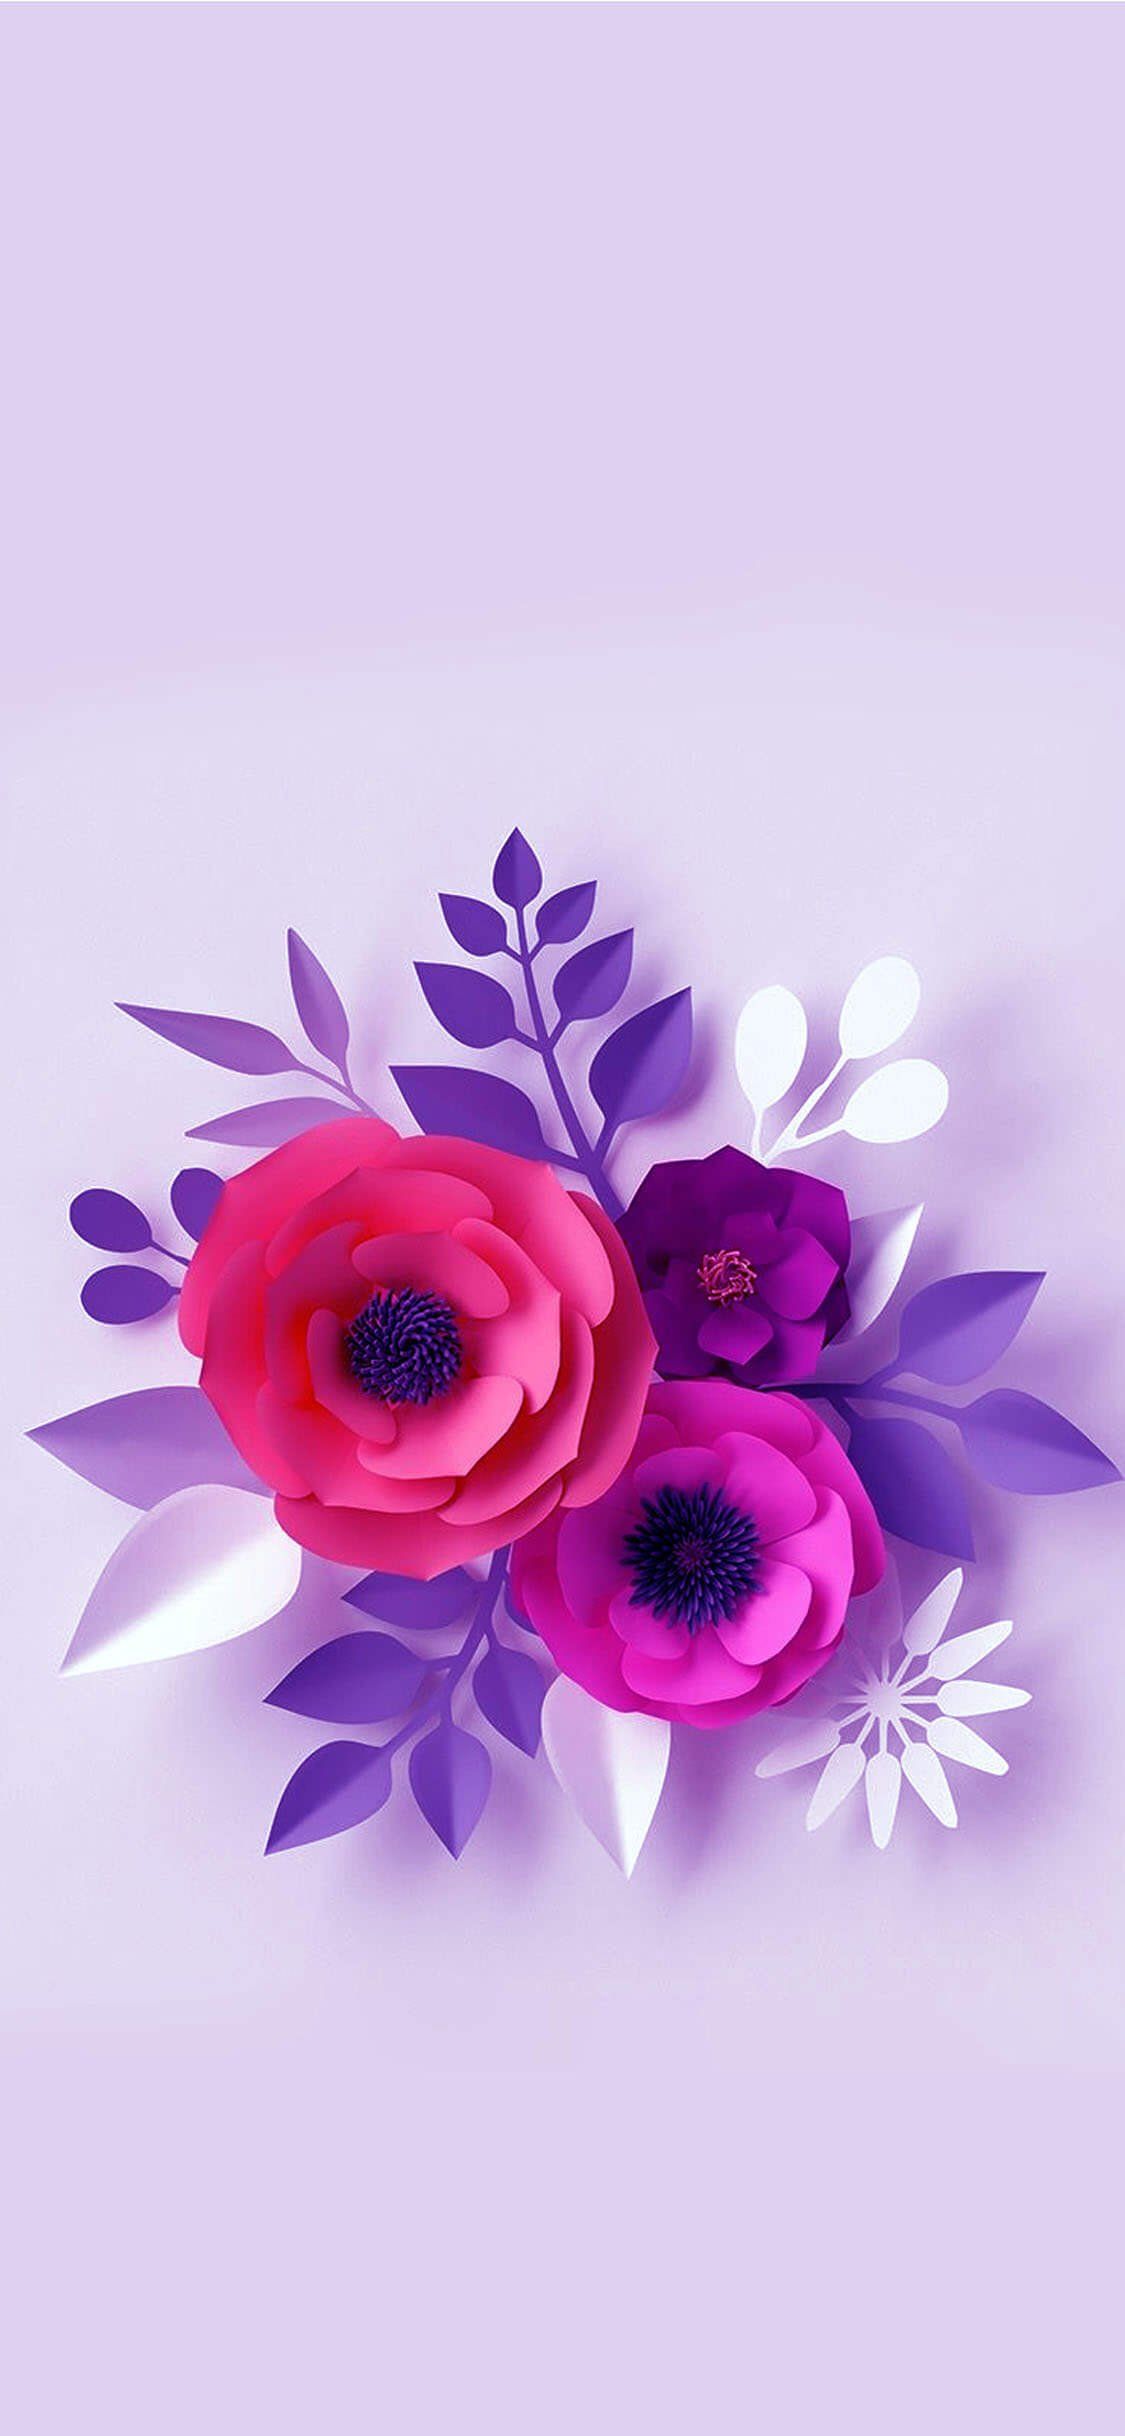 Flower Wallpaper For iPhone HD